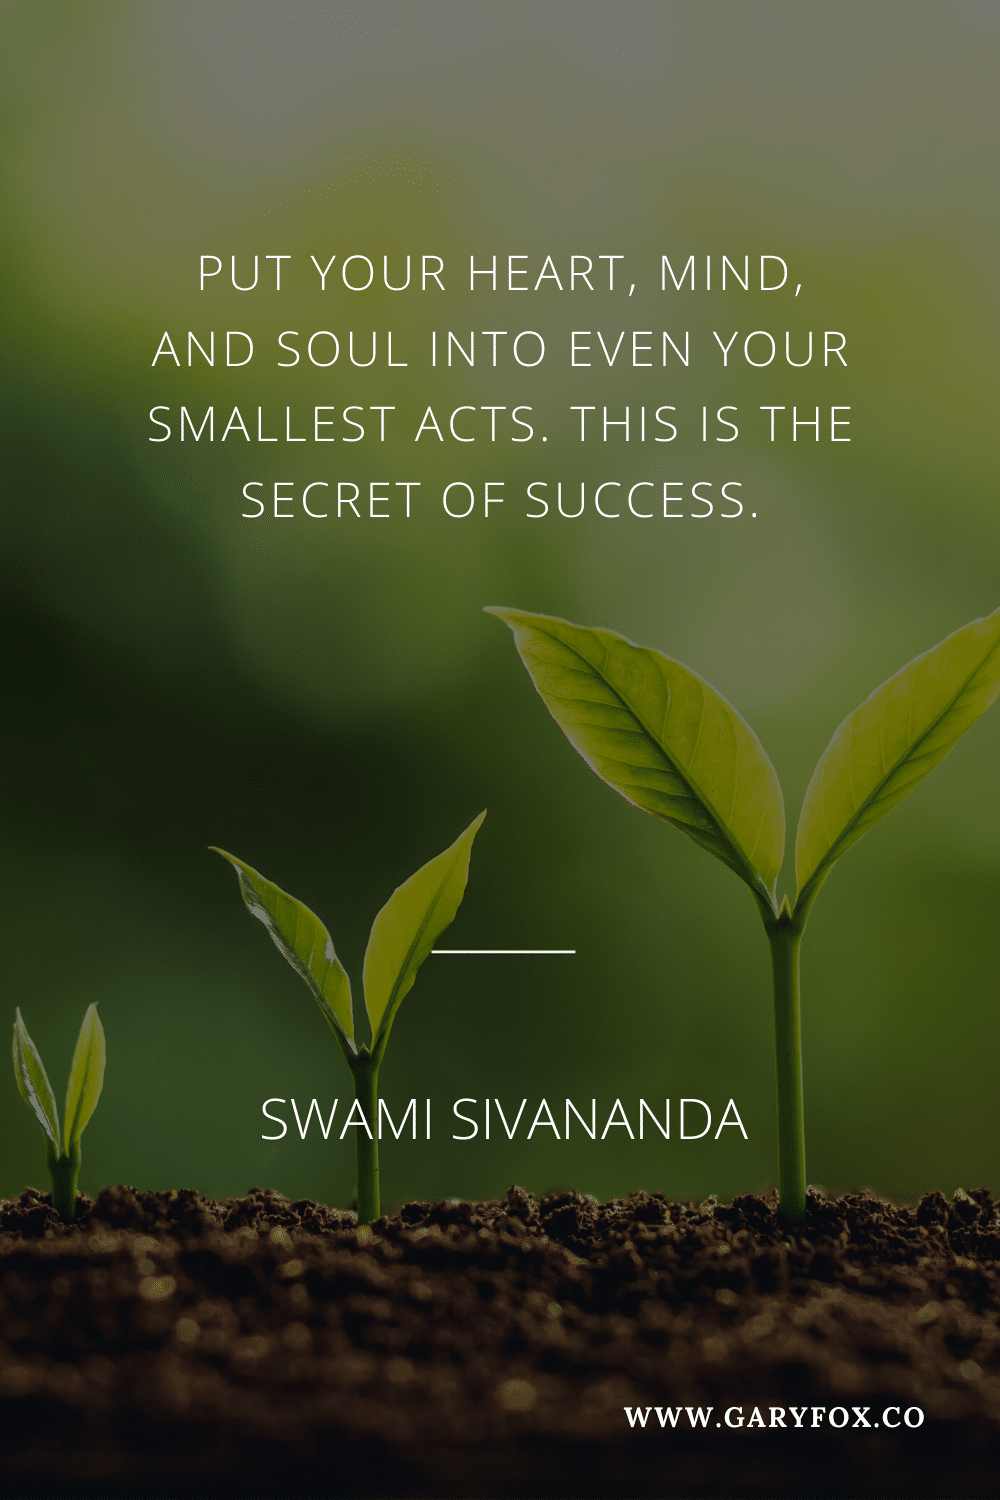 Put Your Heart, Mind, And Soul Into Even Your Smallest Acts. This Is The Secret Of Success. - Swami Sivananda